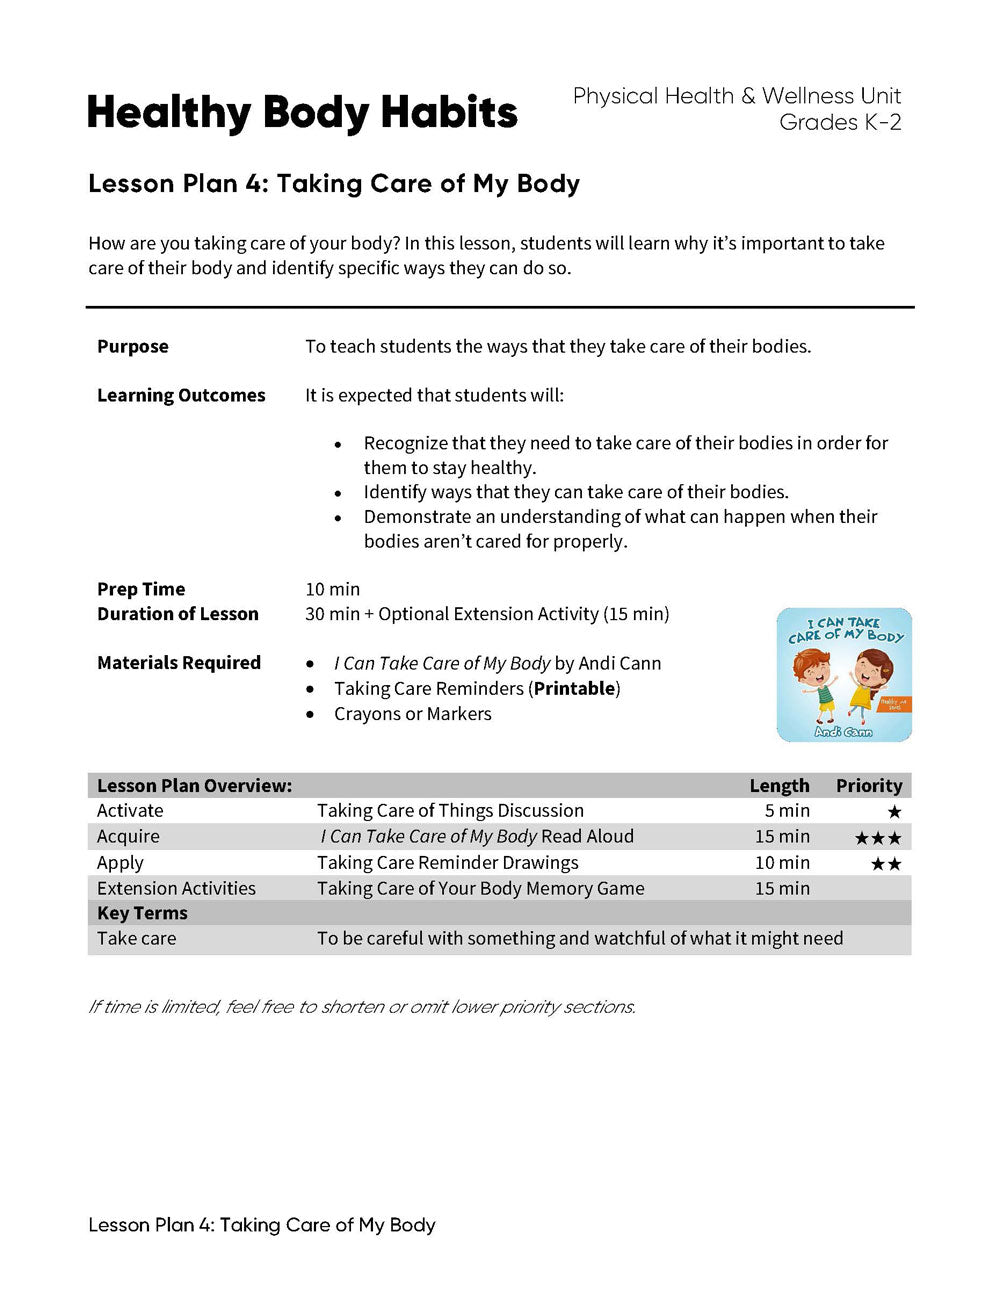 Lesson Plan 4: Taking Care of My Body